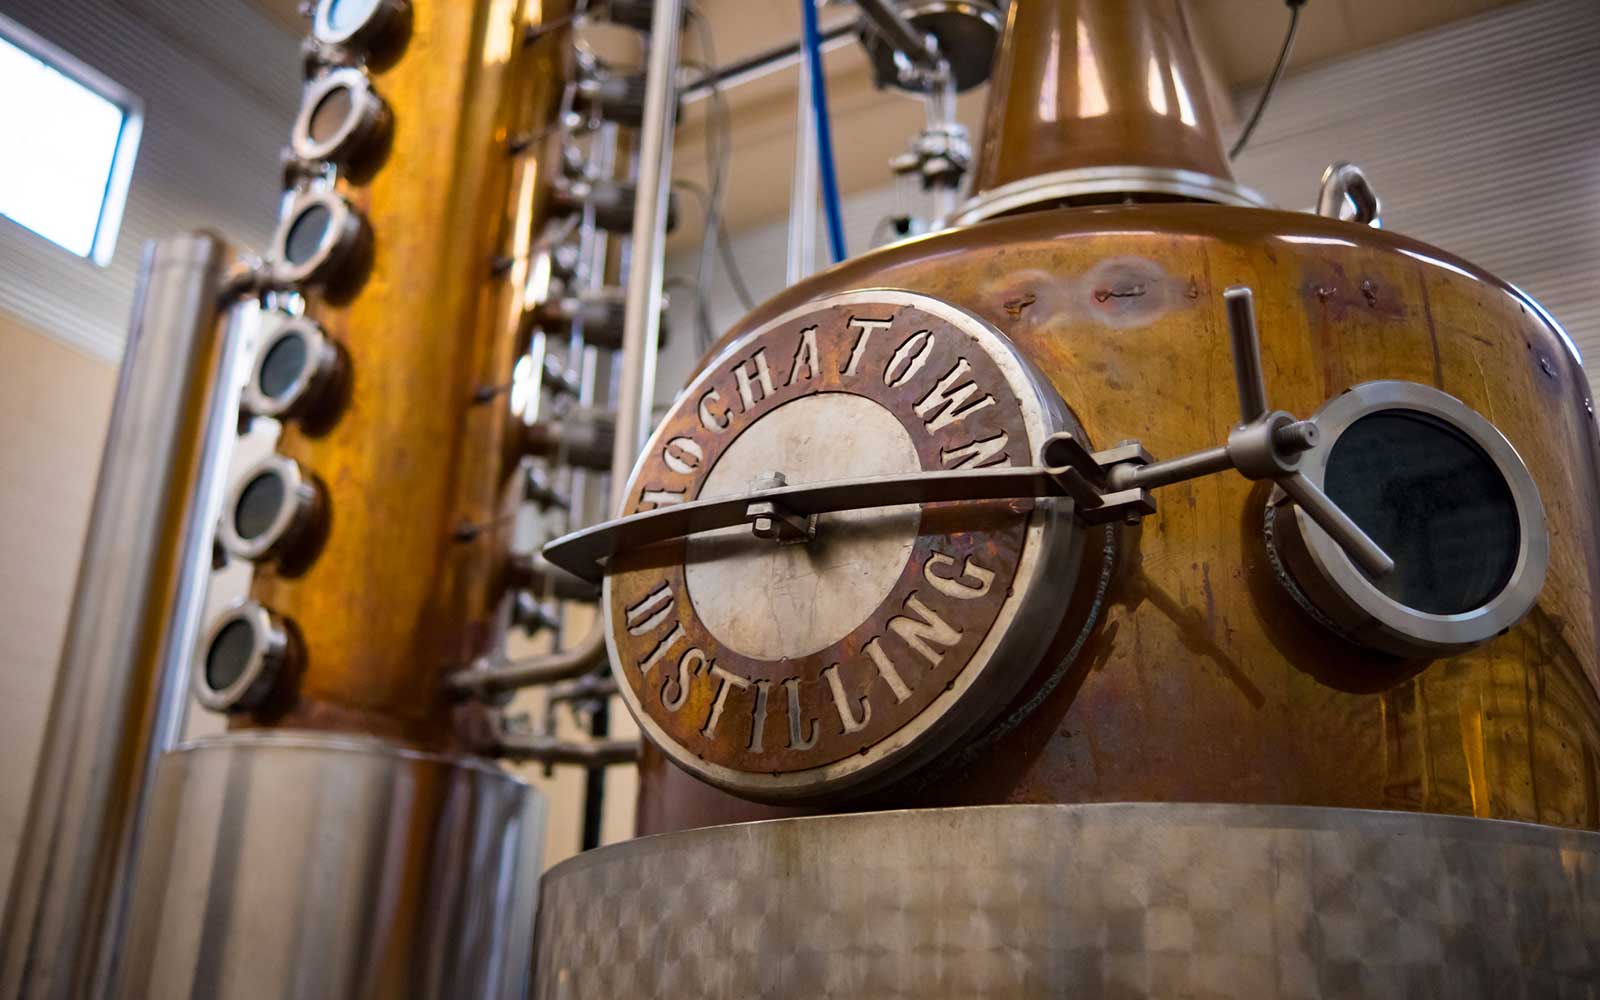 These days the folks at Hochatown Distilling have traded secret labs in the forest for professional-grade copper stills and barrel-aging.